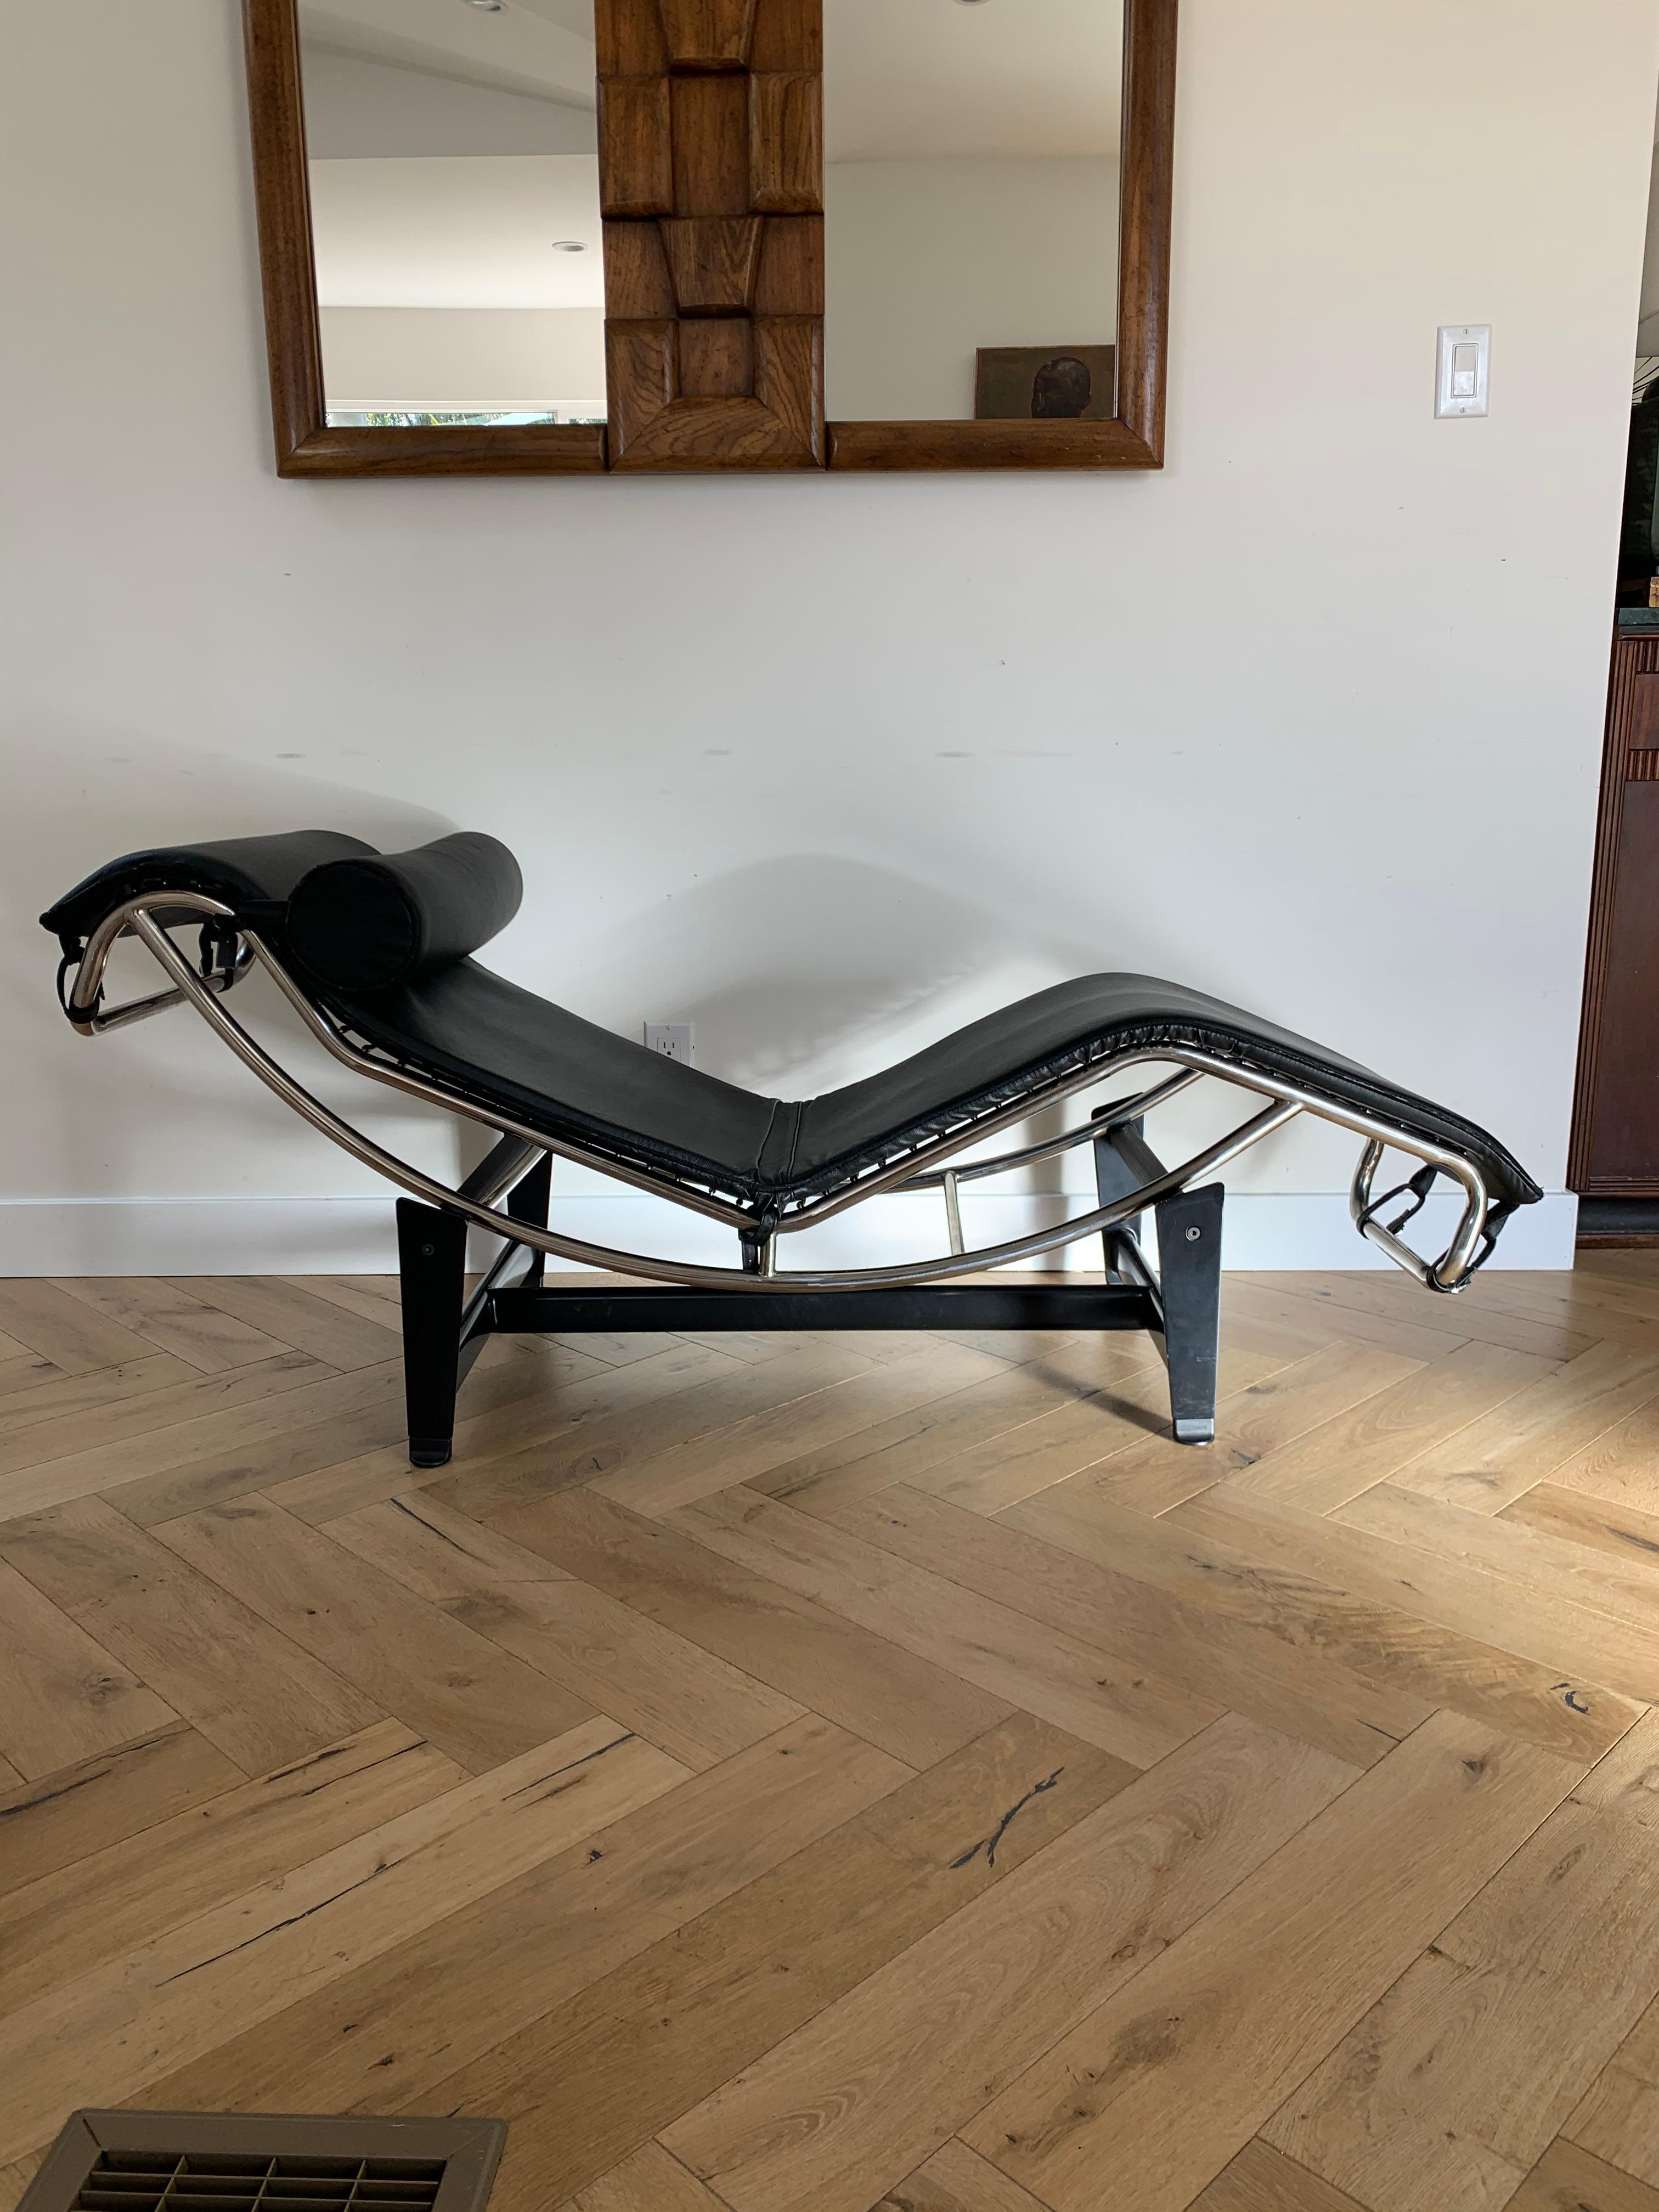 The 1920s Bauhaus icon from Cassina Lc4 “Zero Gravity” chaise longue, redesigned by Le Corbusier, Charlotte Perriand, and Pierre Jeanneret. This is a vintage reproduction and does show some signs of age so please inspect photos. Extraordinarily